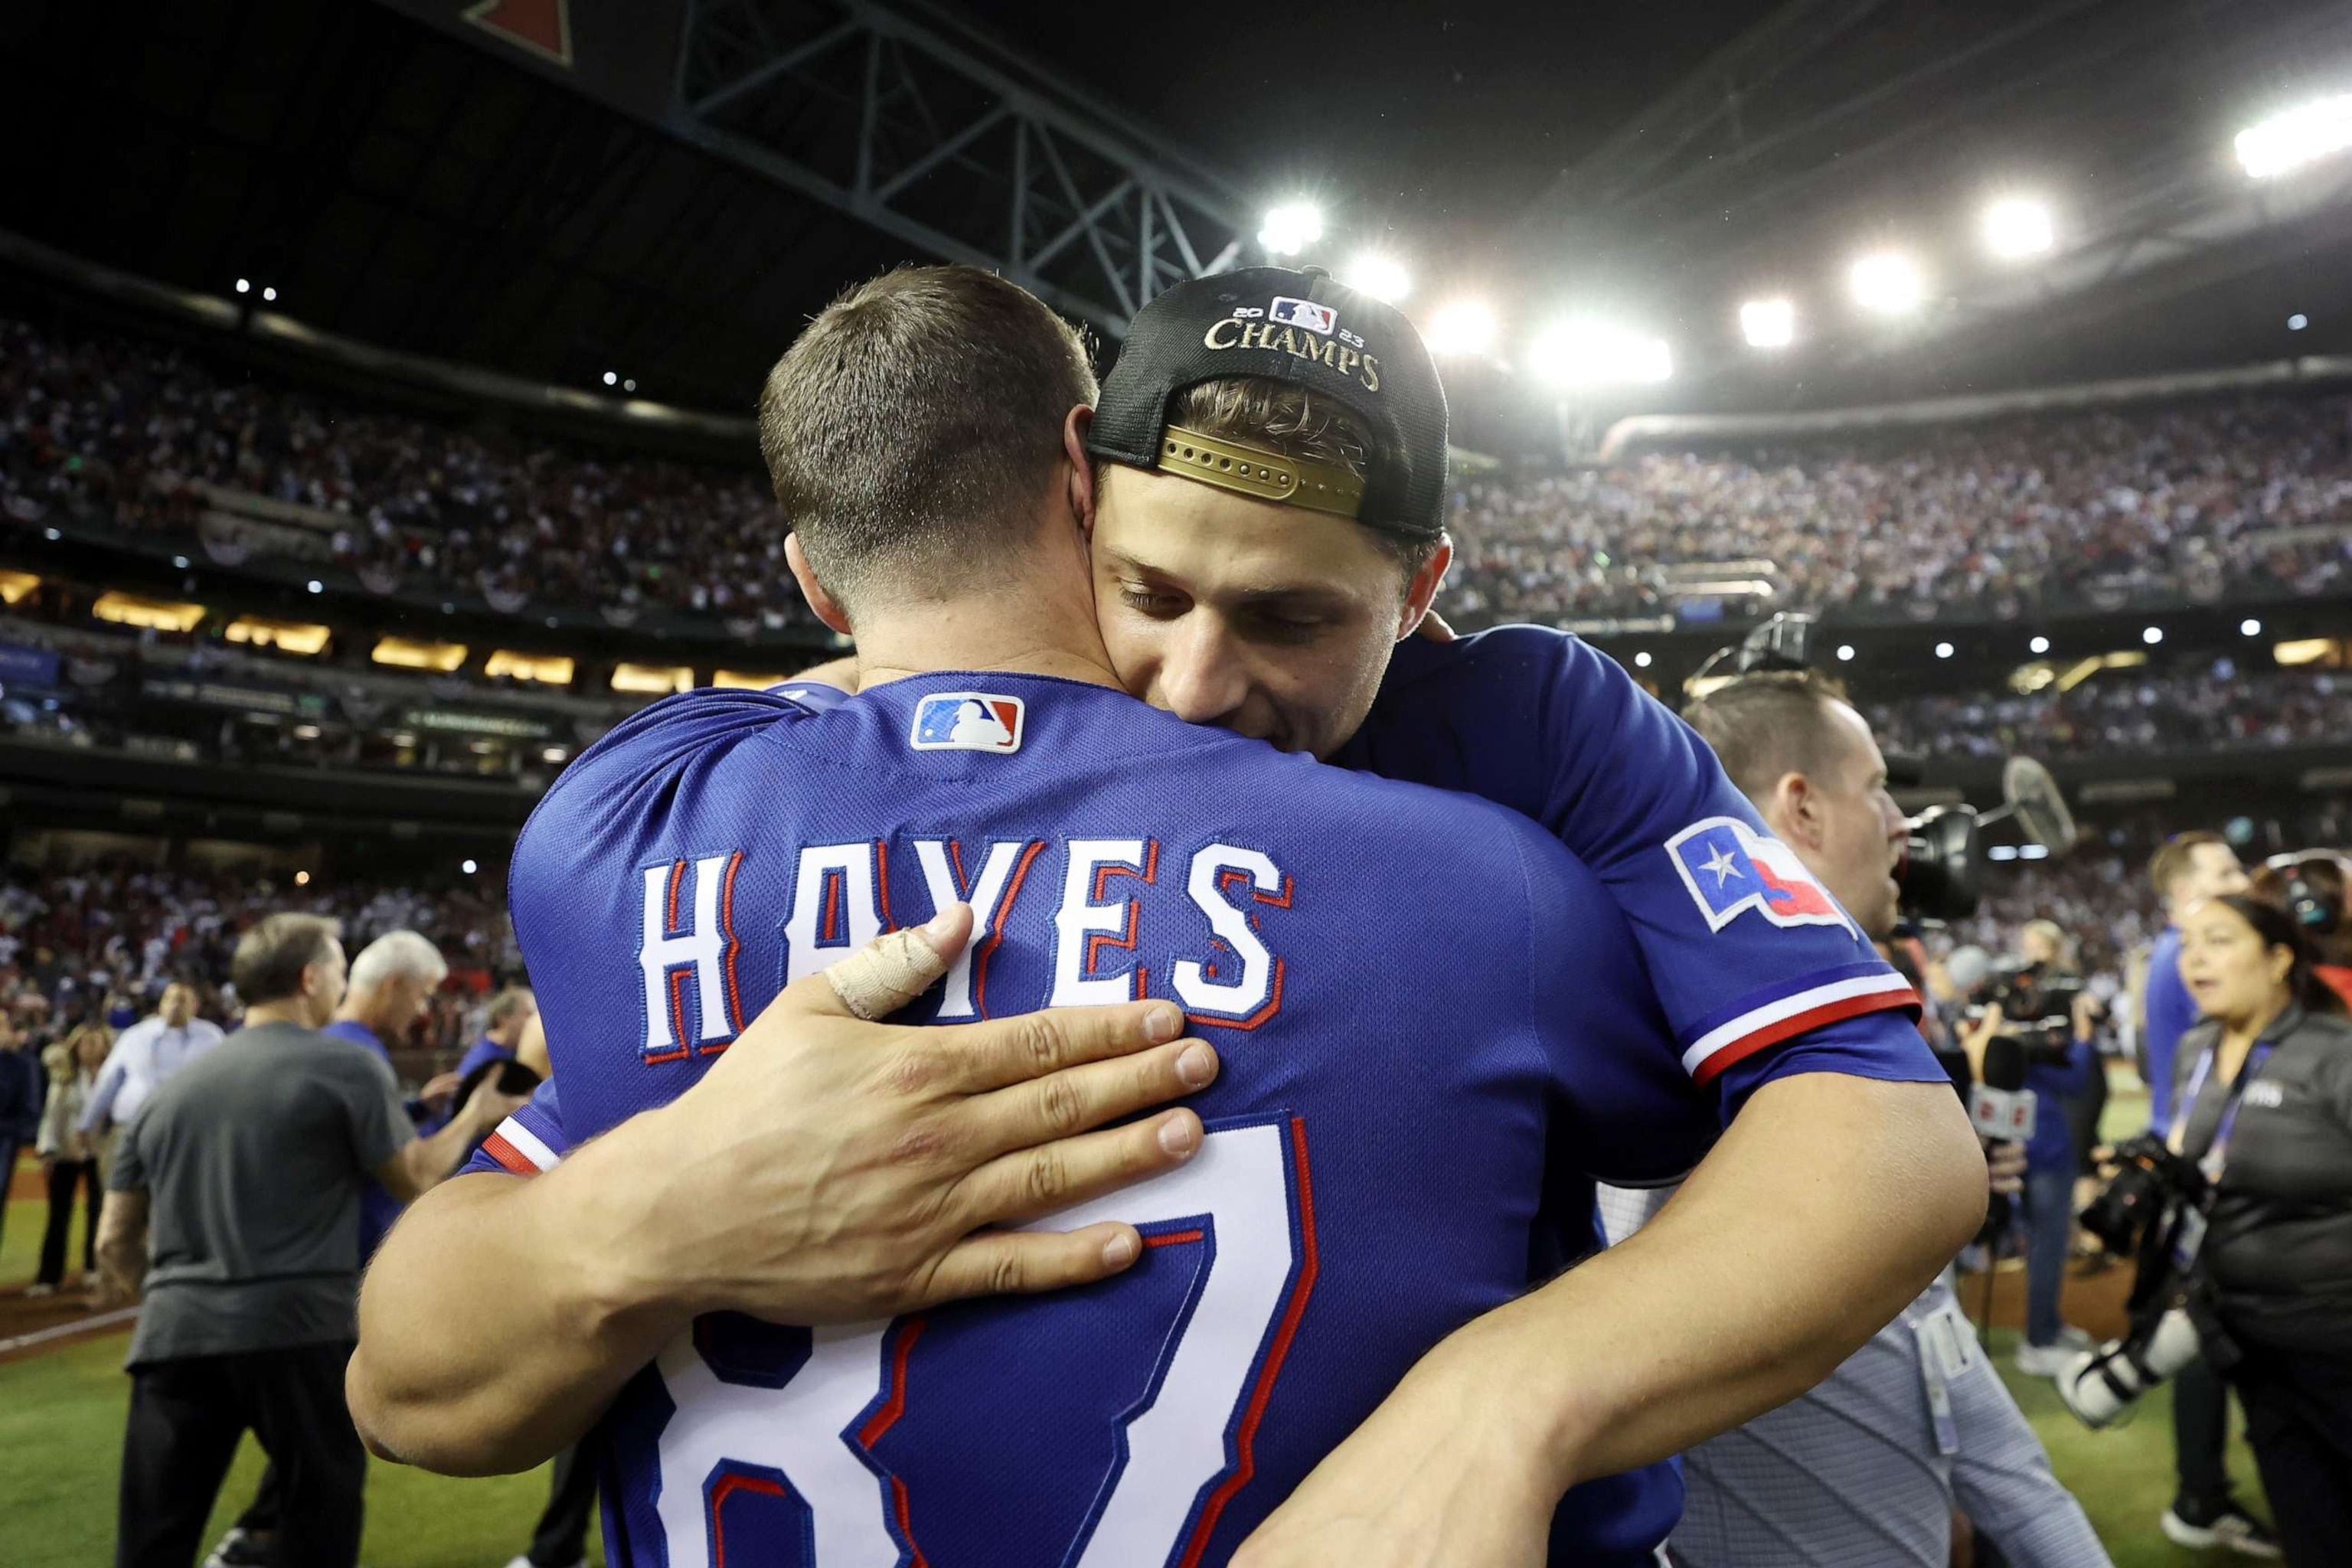 Coach Brett Hayes and Corey Seager #5 of the Texas Rangers celebrate after the Texas Rangers beat the Arizona Diamondbacks 5-0 in Game Five to win the World Series at Chase Field on November 01, 2023 in Phoenix, Arizona